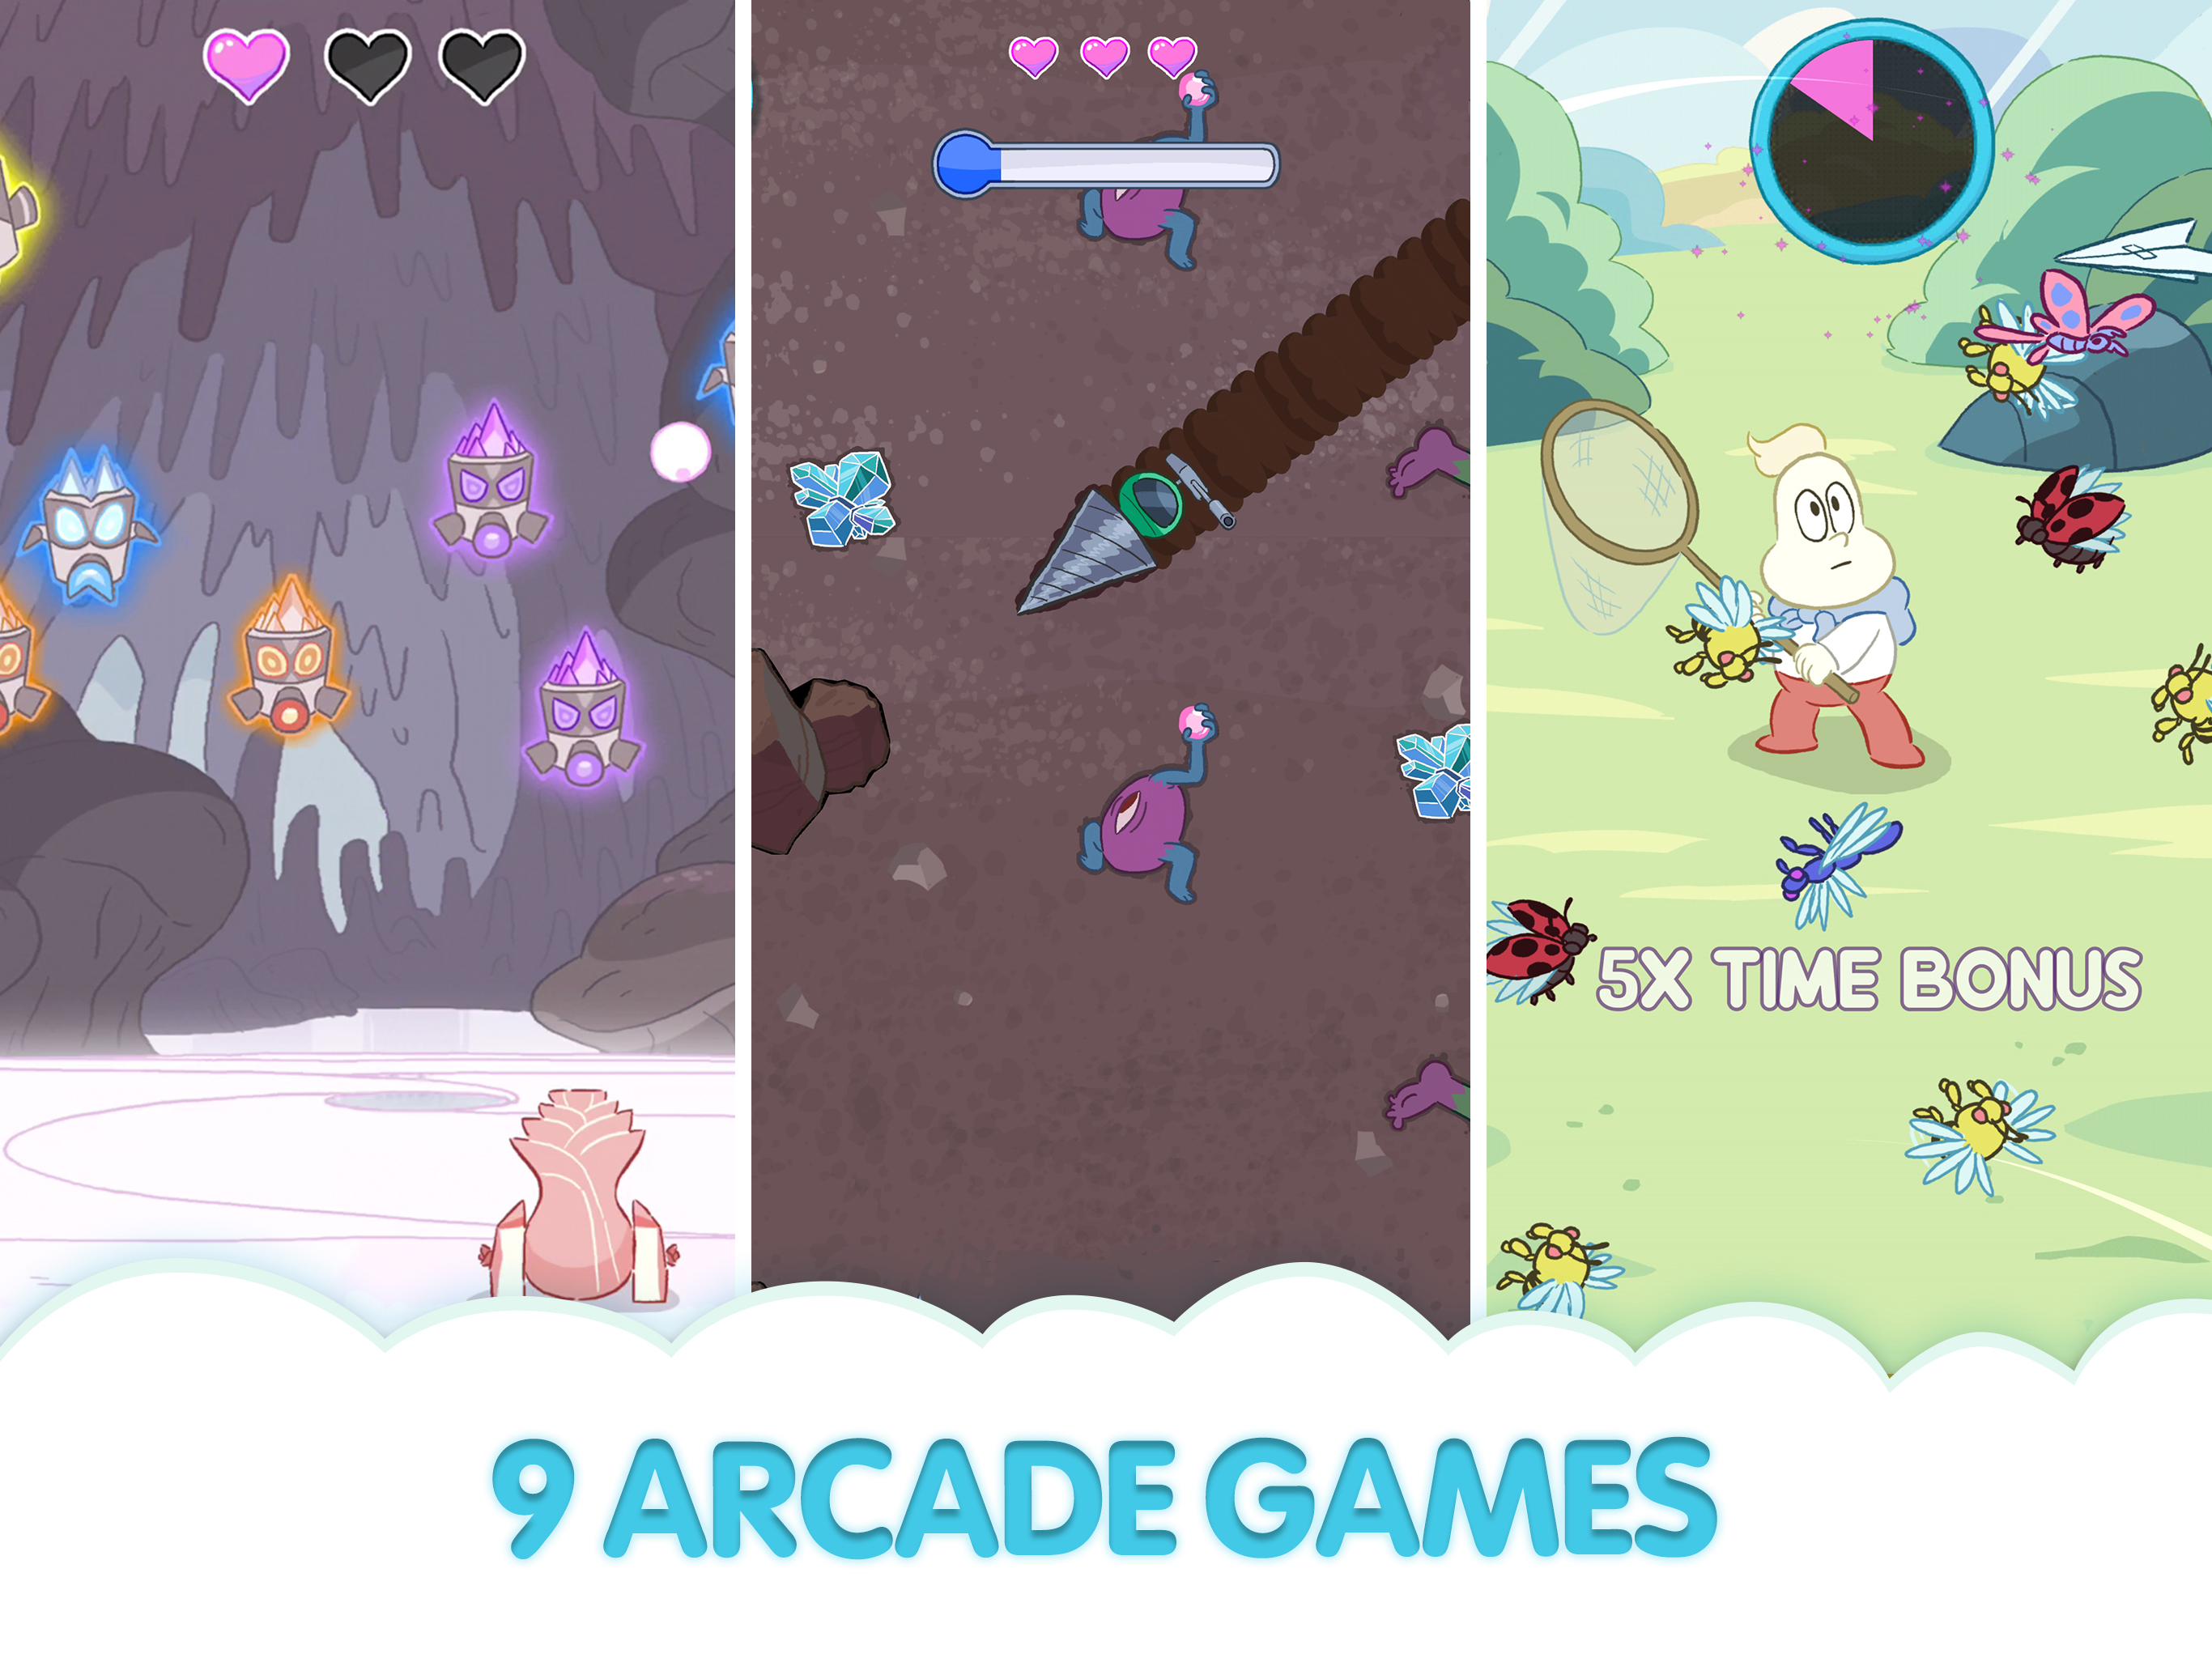 'Steven Universe: Dreamland Arcade' Brings Nine Arcade Games Each Focused on a Character from the Show